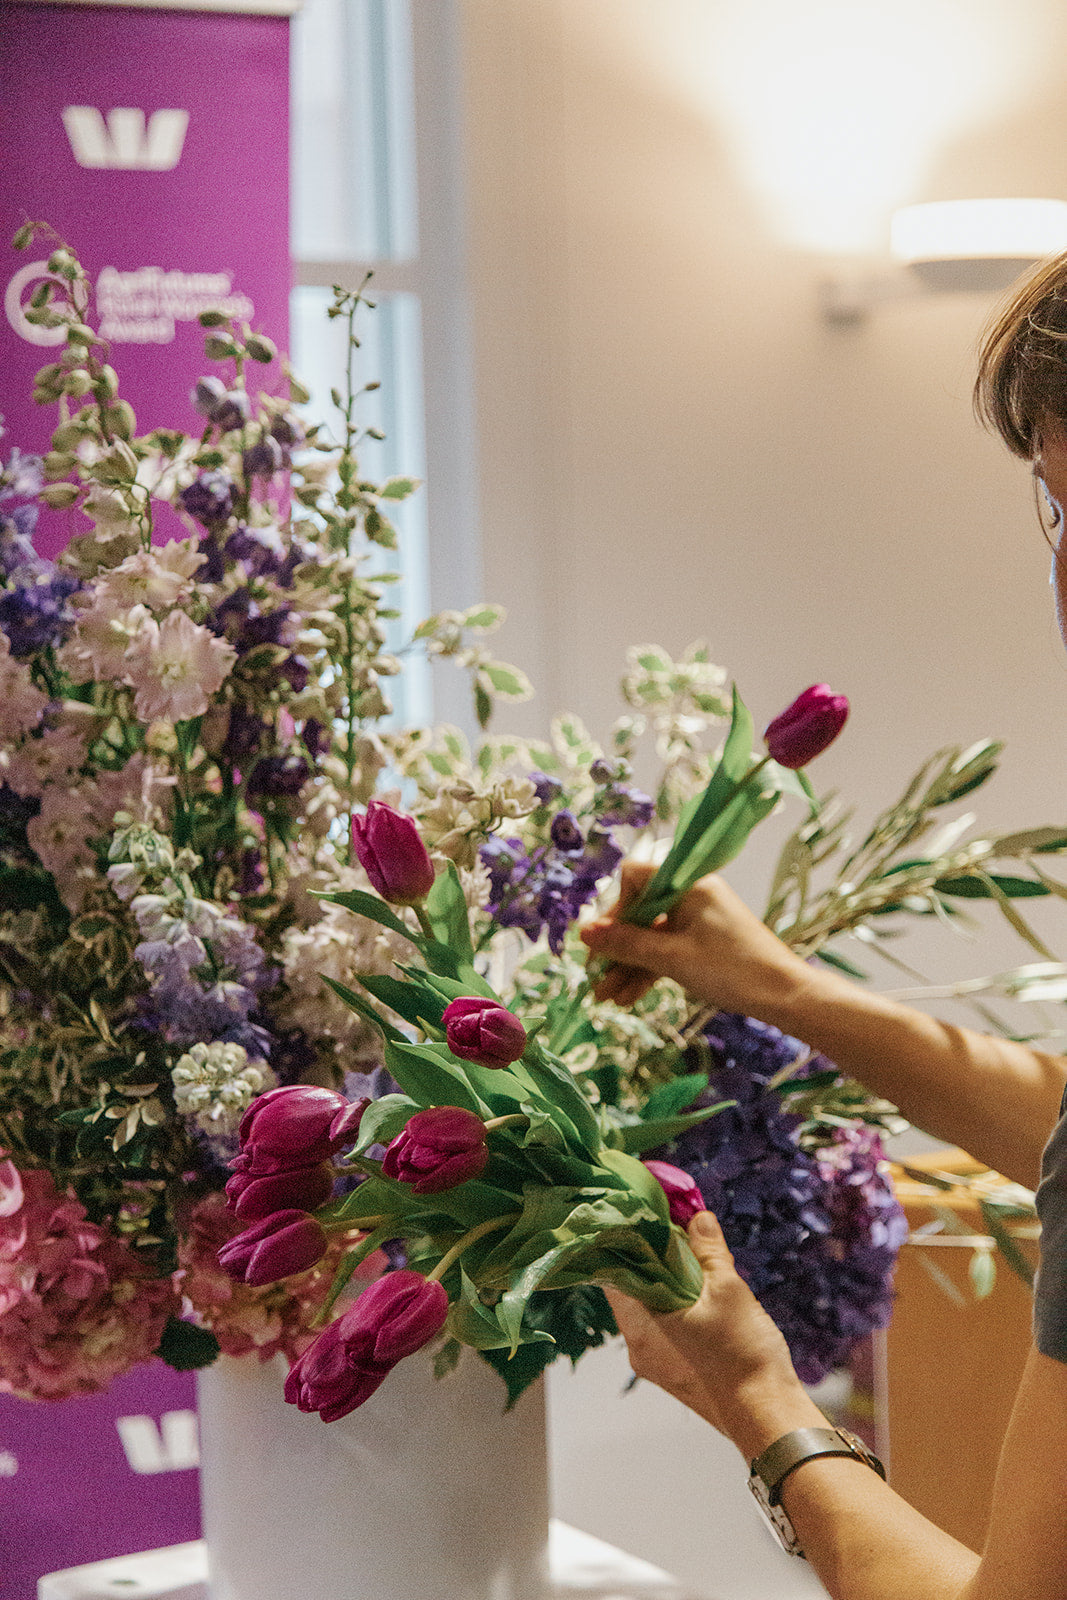 Maria arranging flowers in a vase on a table